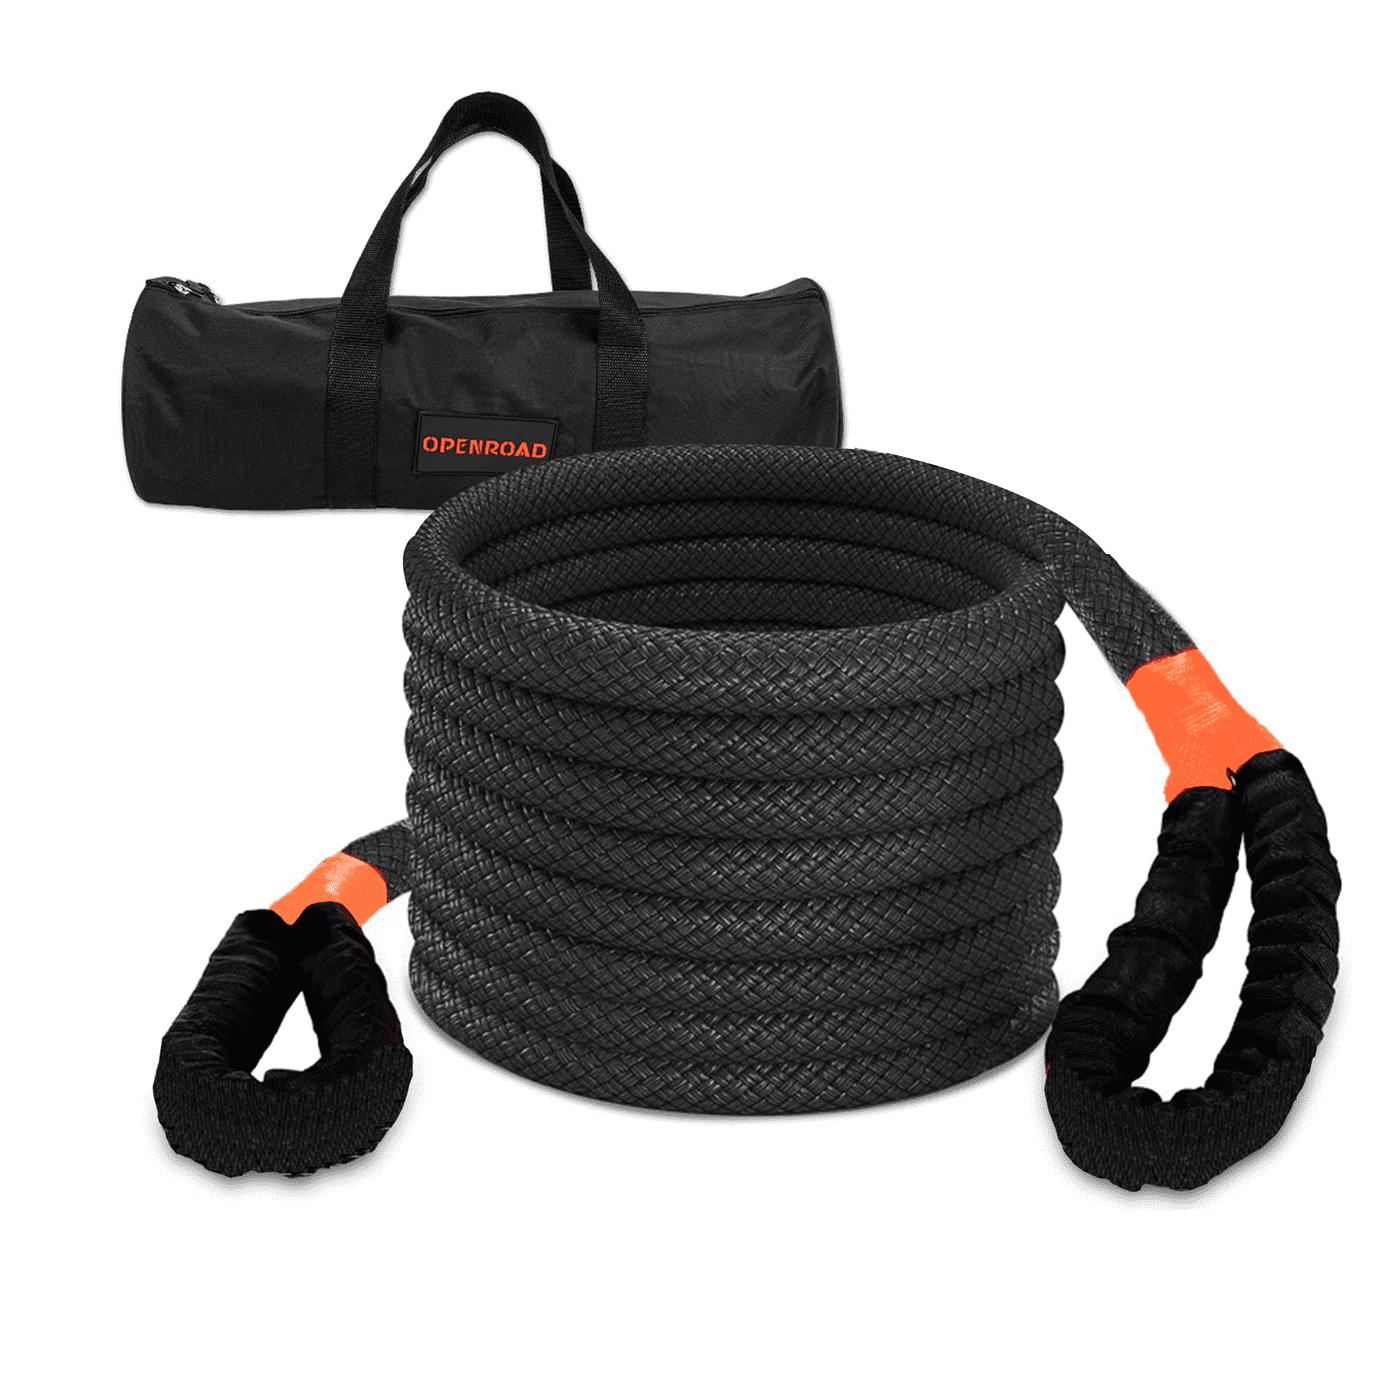 OPENROAD 1" x30' Kinetic Recovery Tow Rope (25,000lbs)，for Truck Off-road Vehicle ATV UTV, Carry Bag Included Recovery Straps OPENROAD Black  